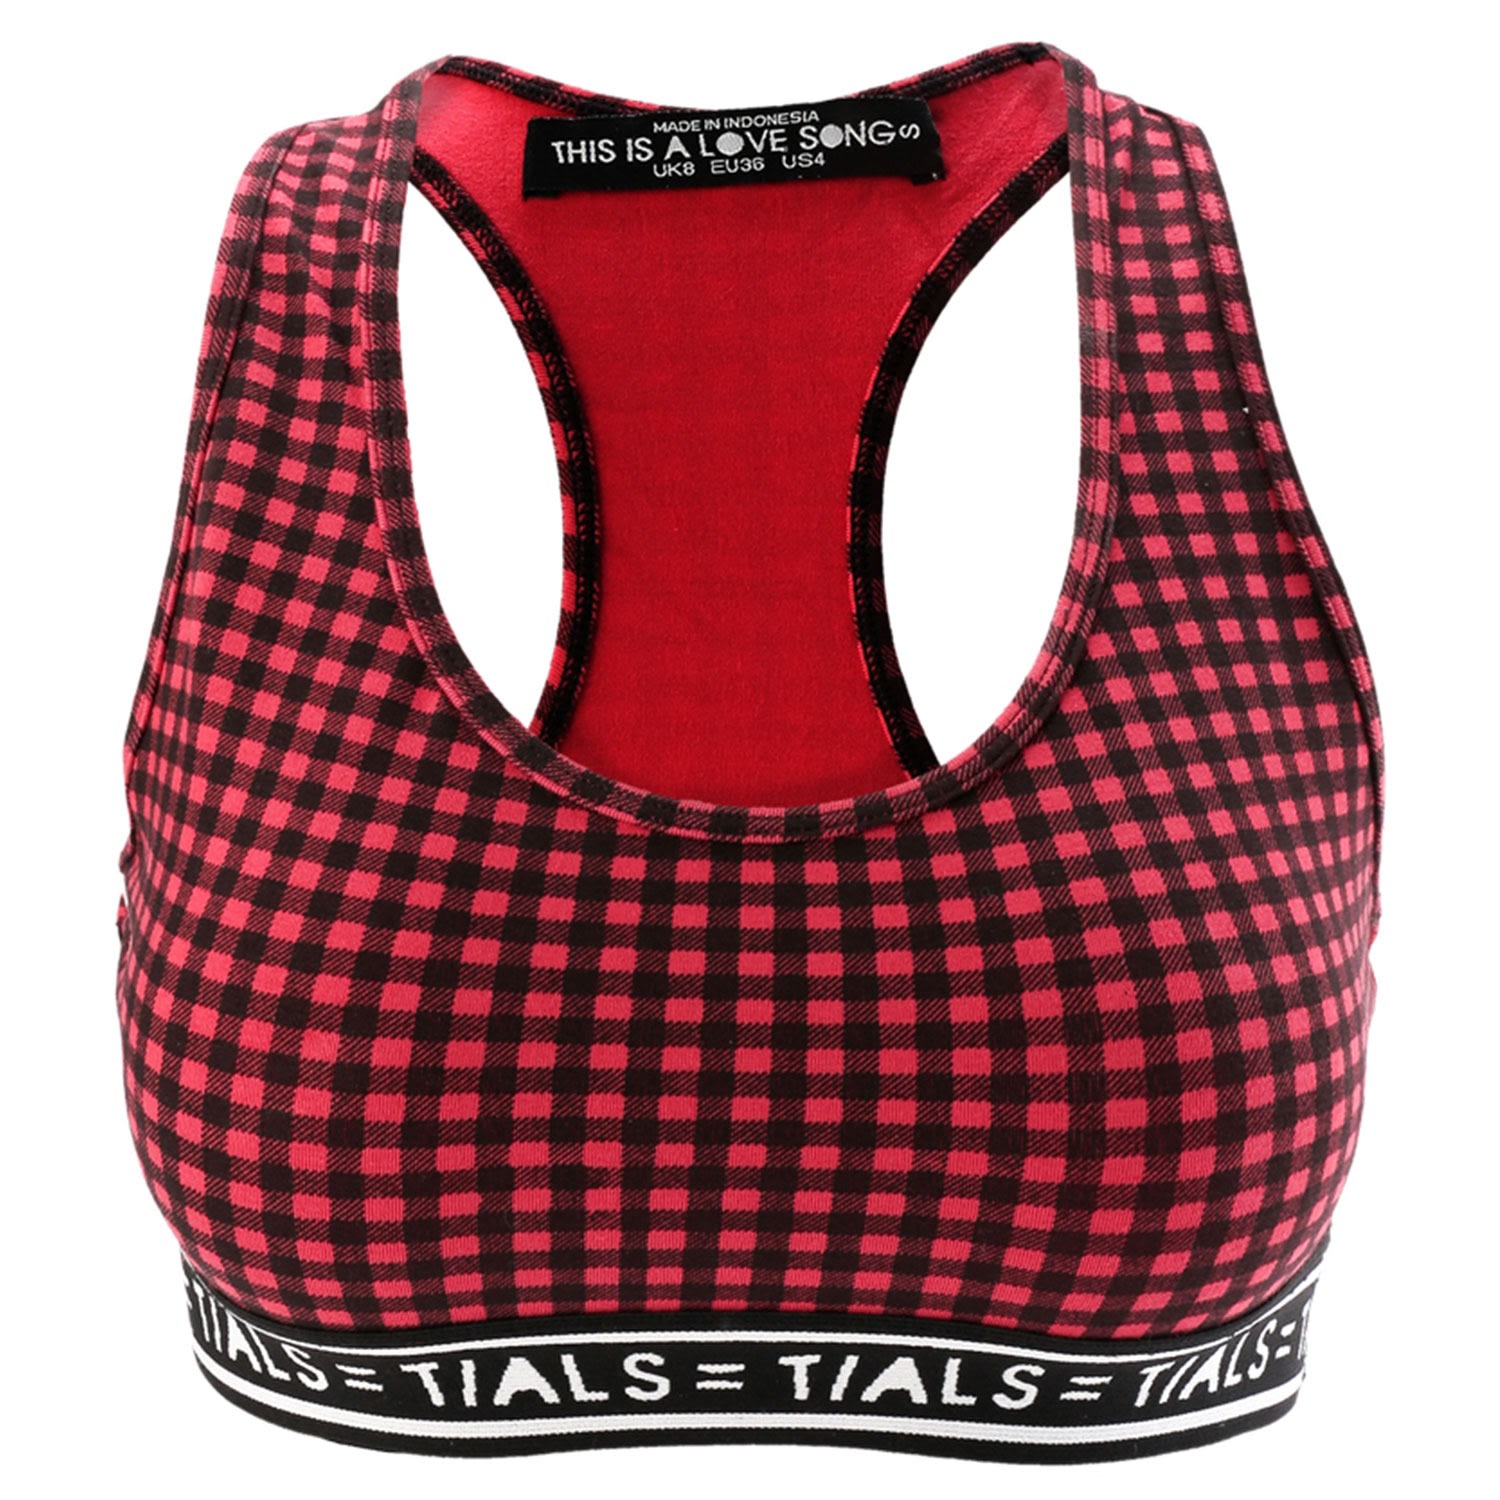 THIS IS A LOVE SONG - Piper Bra Red Gingham